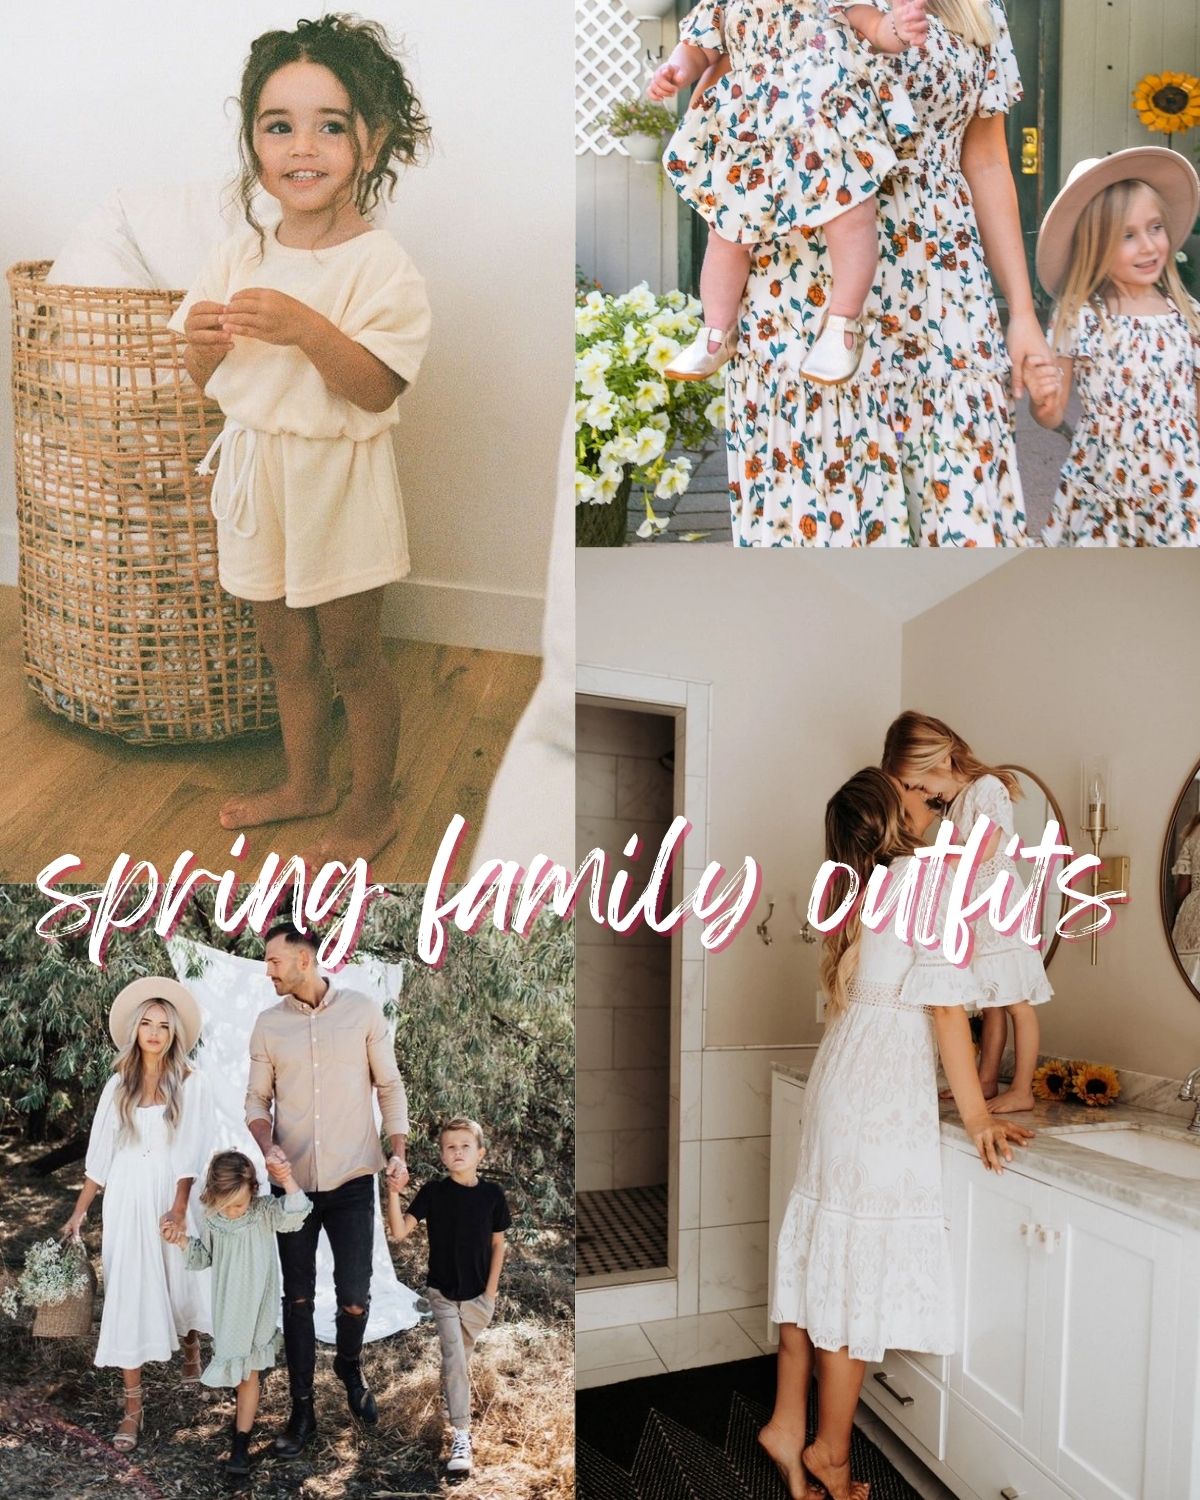 Bohemian family outfits for spring